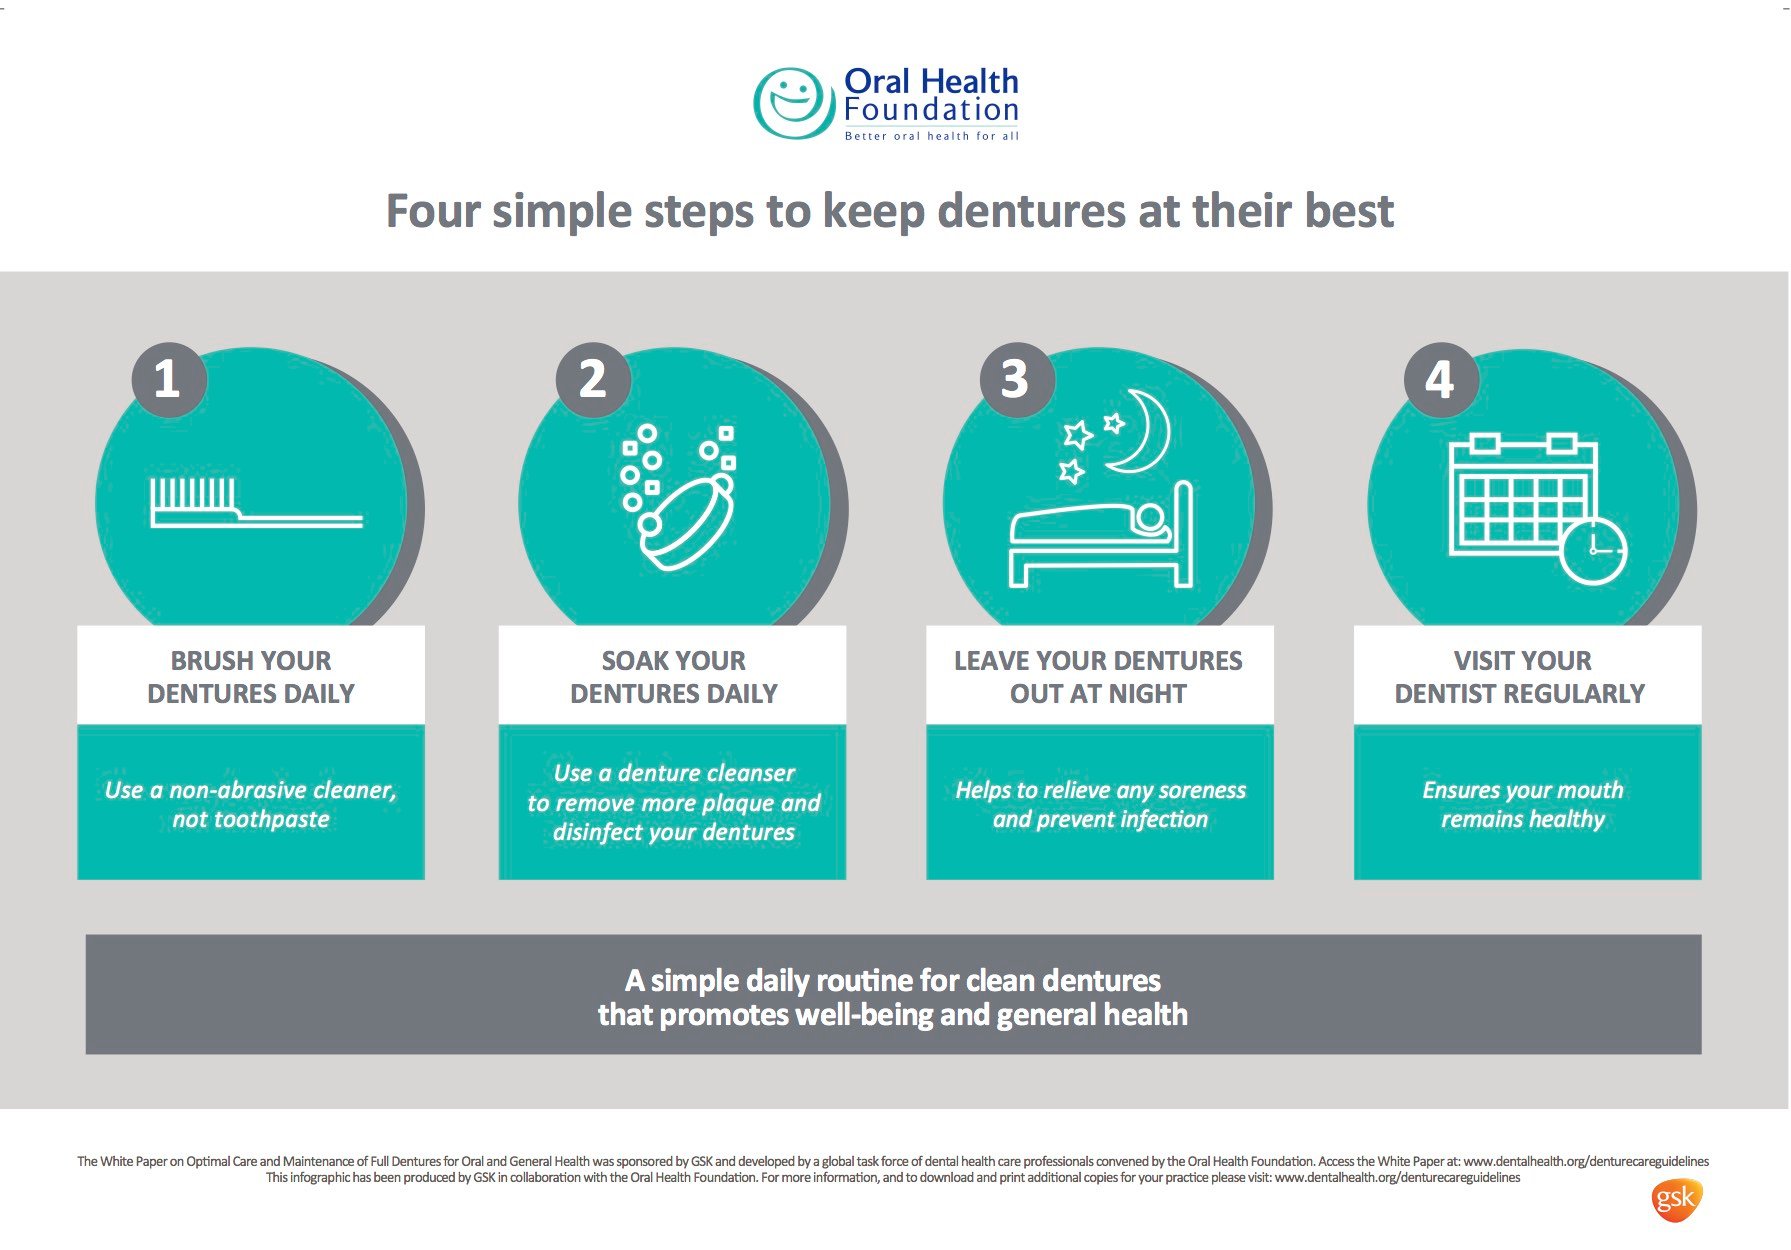 OHF_GSK_Denture_Care_Guidelines_Infographic-1